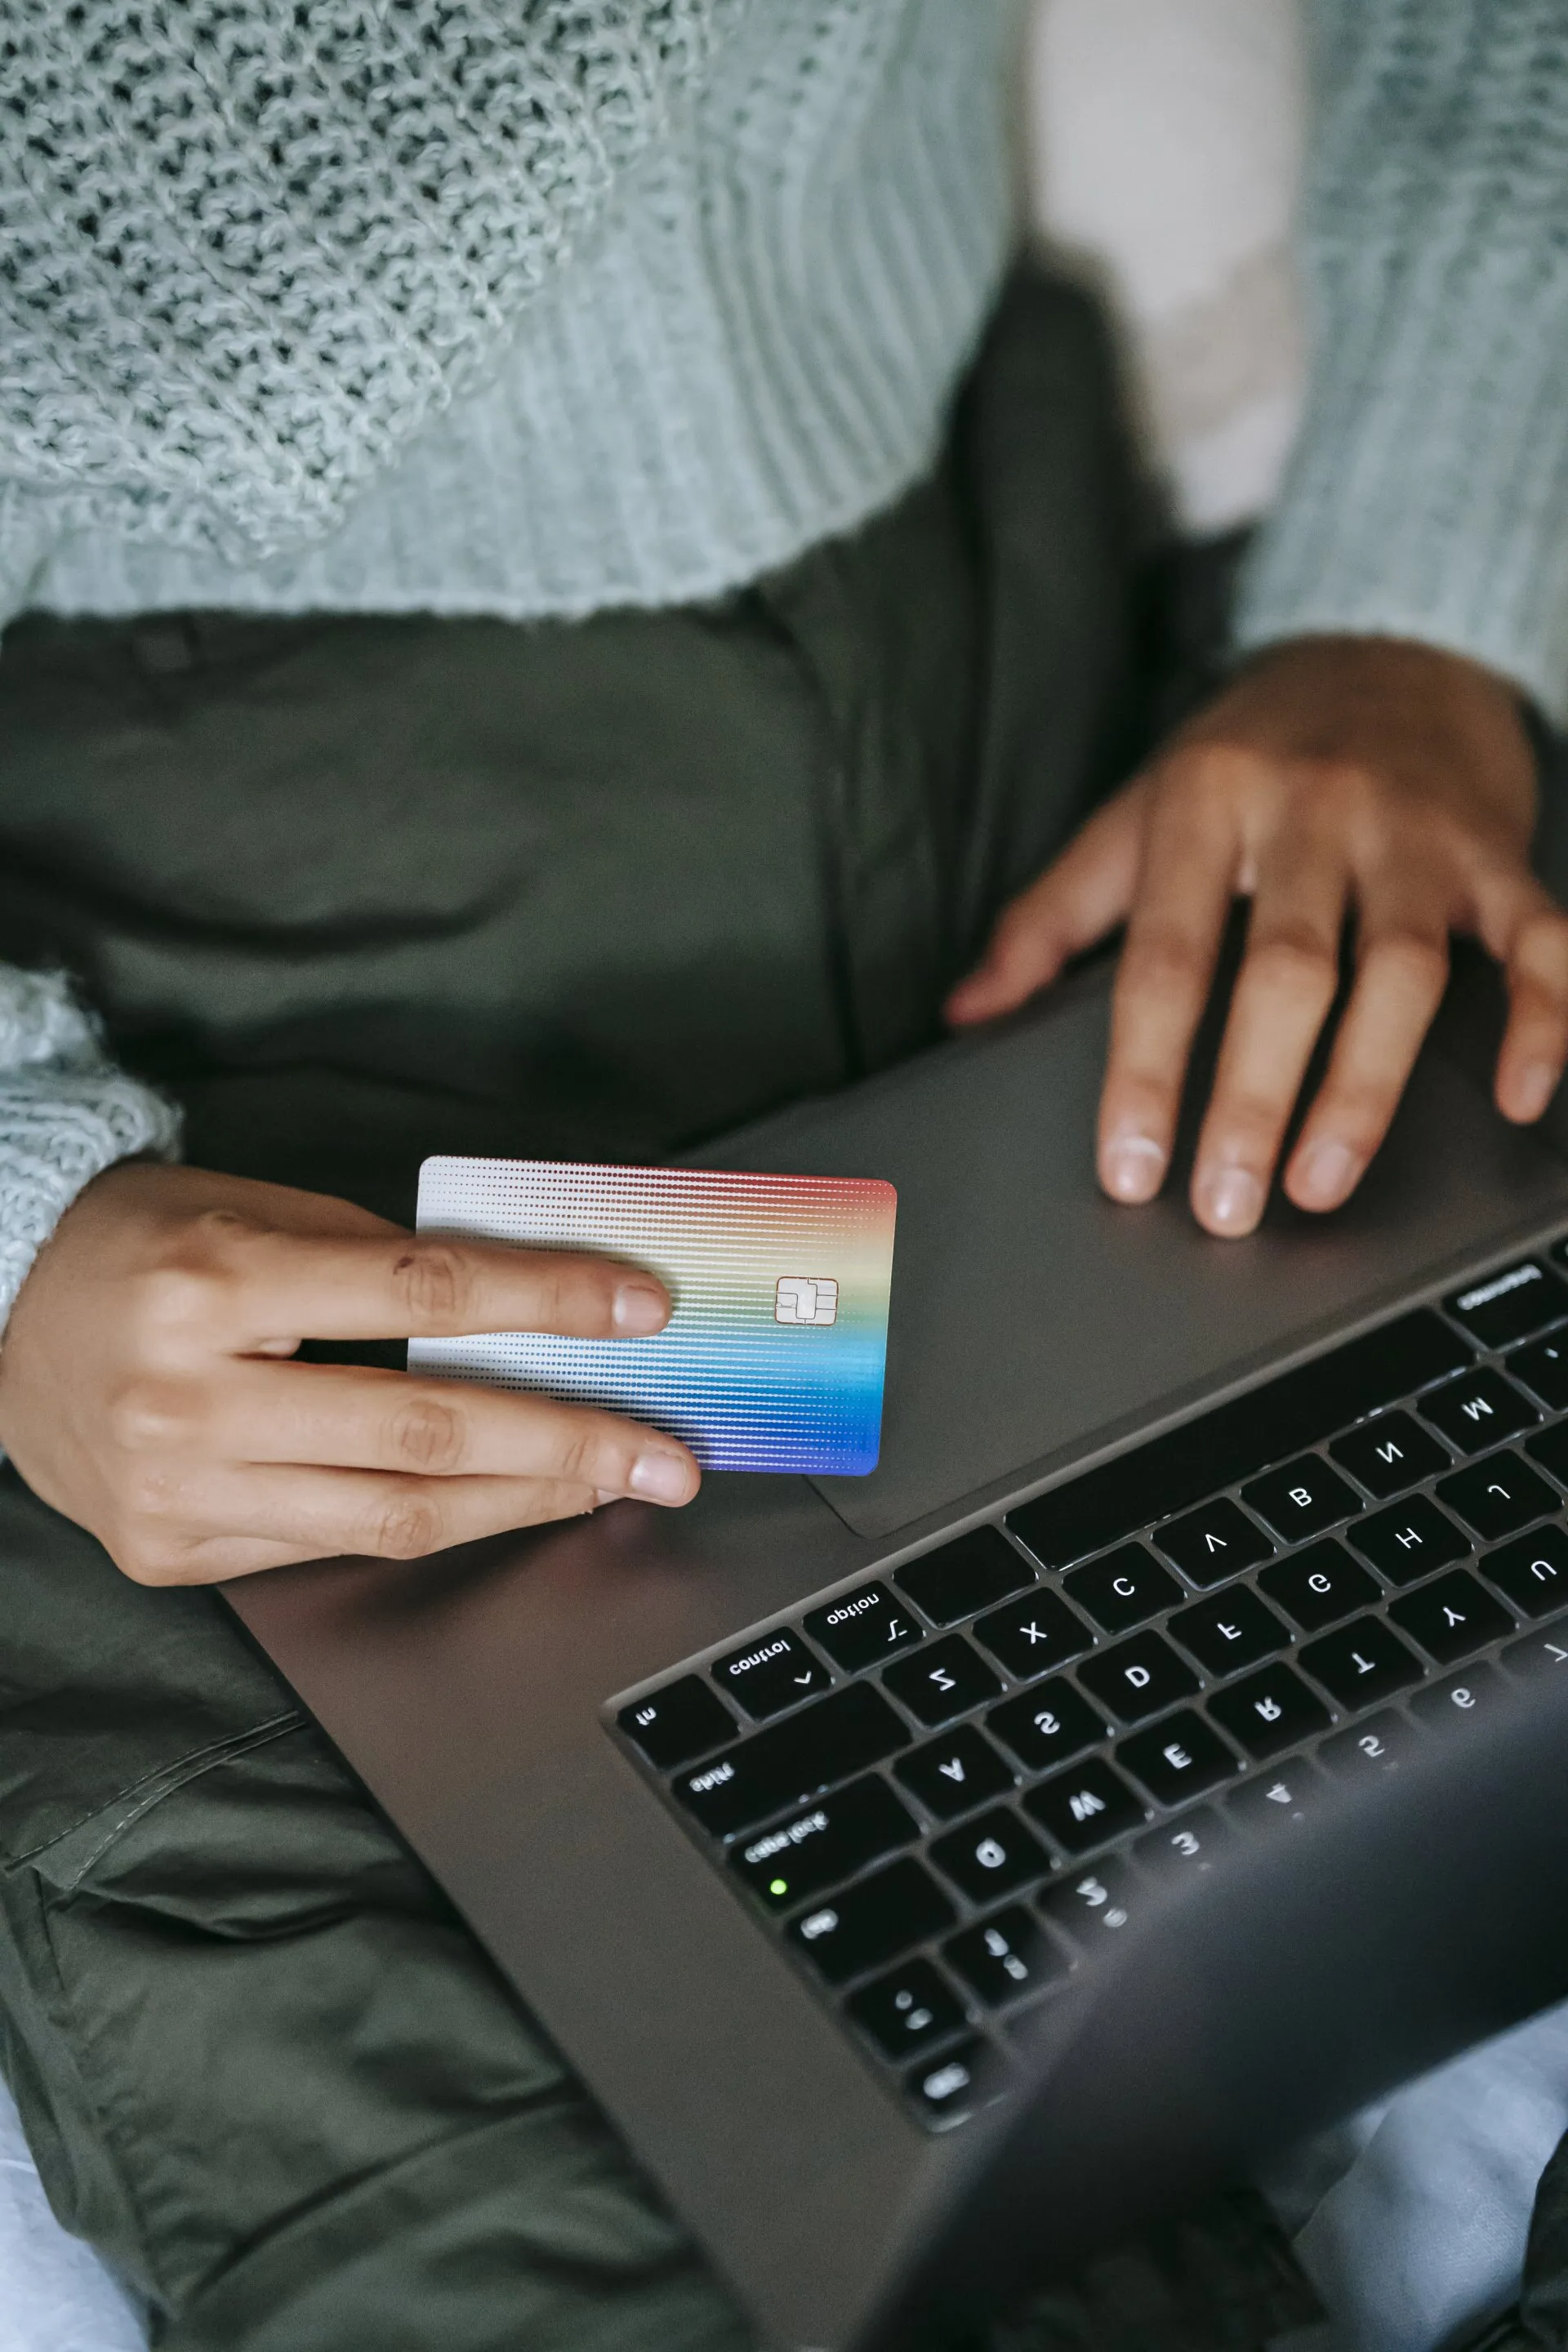 a person is holding a credit card while using a laptop computer .